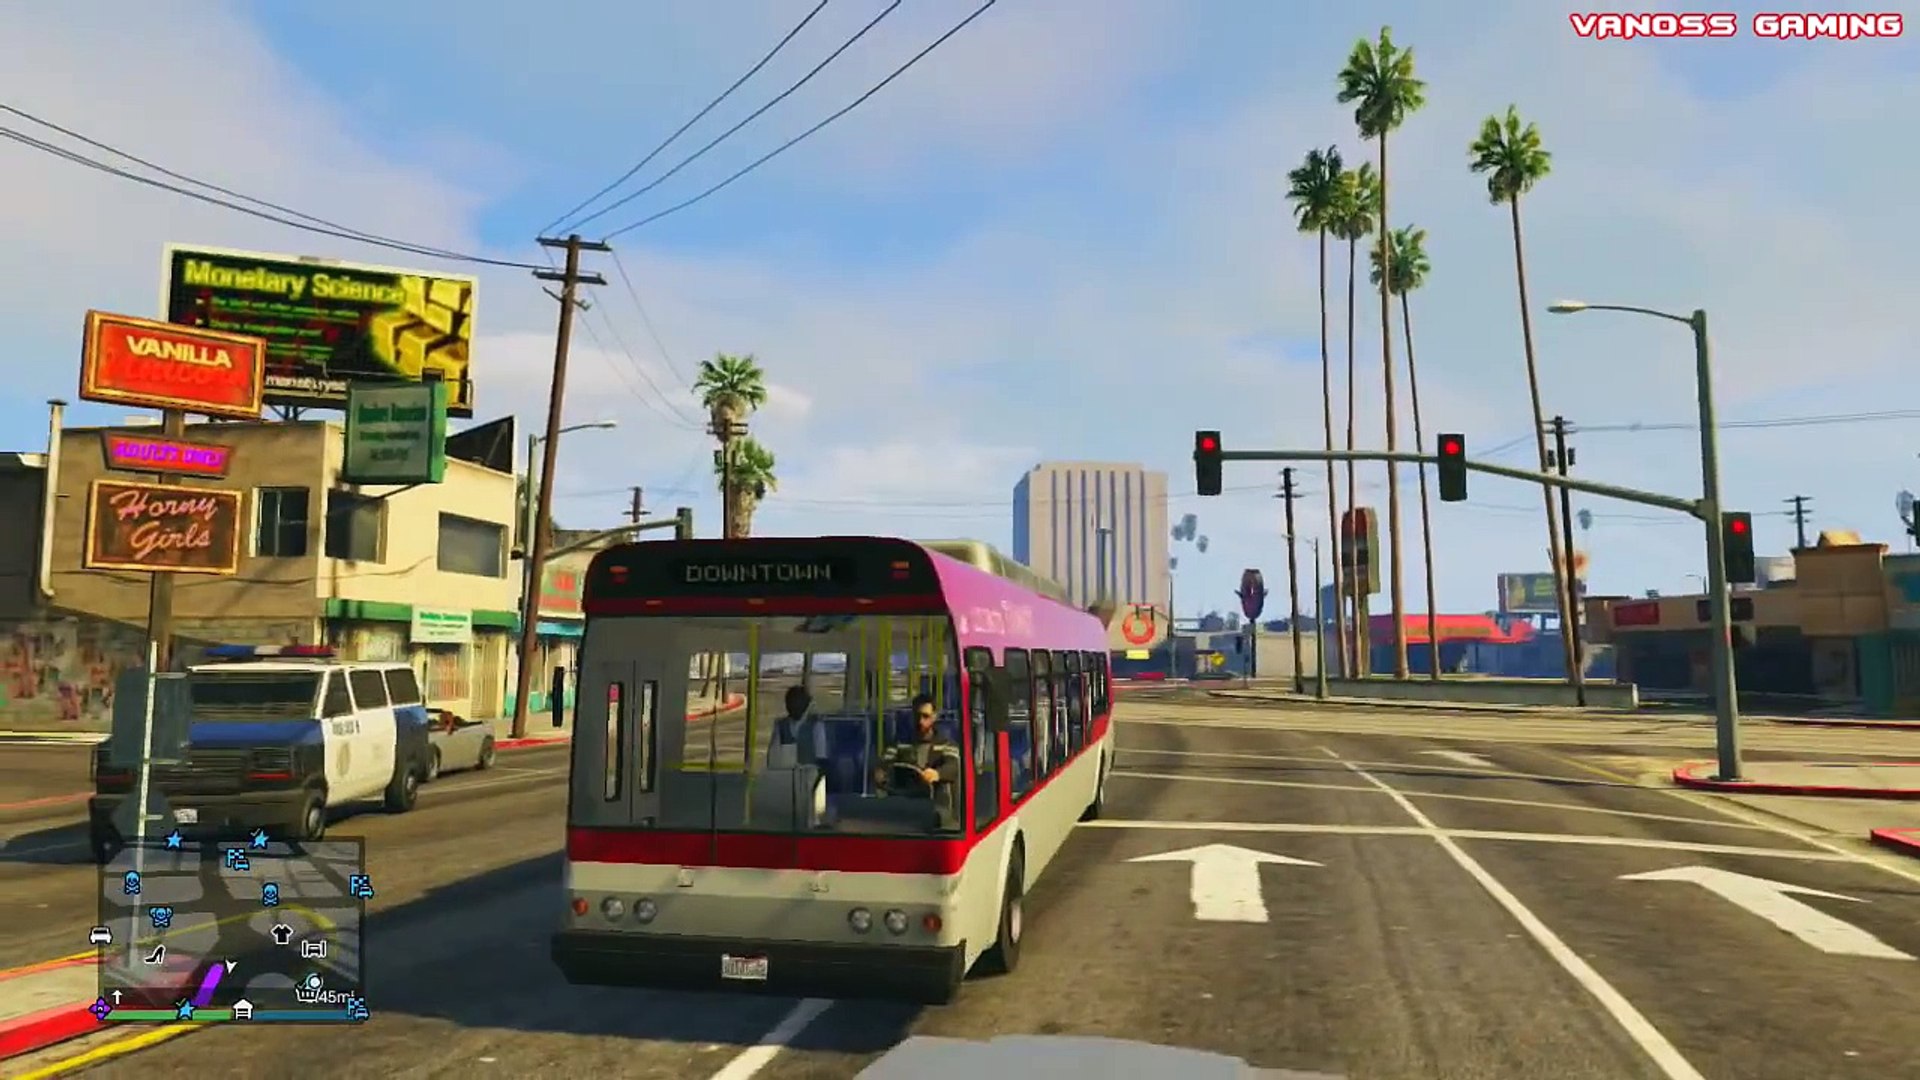 VanossGaming- GTA 5 Online Funny Moments Gameplay 2 - WE DUH BUS, Bugatti  Chase Fun, Hooker (Multiplayer) - video Dailymotion